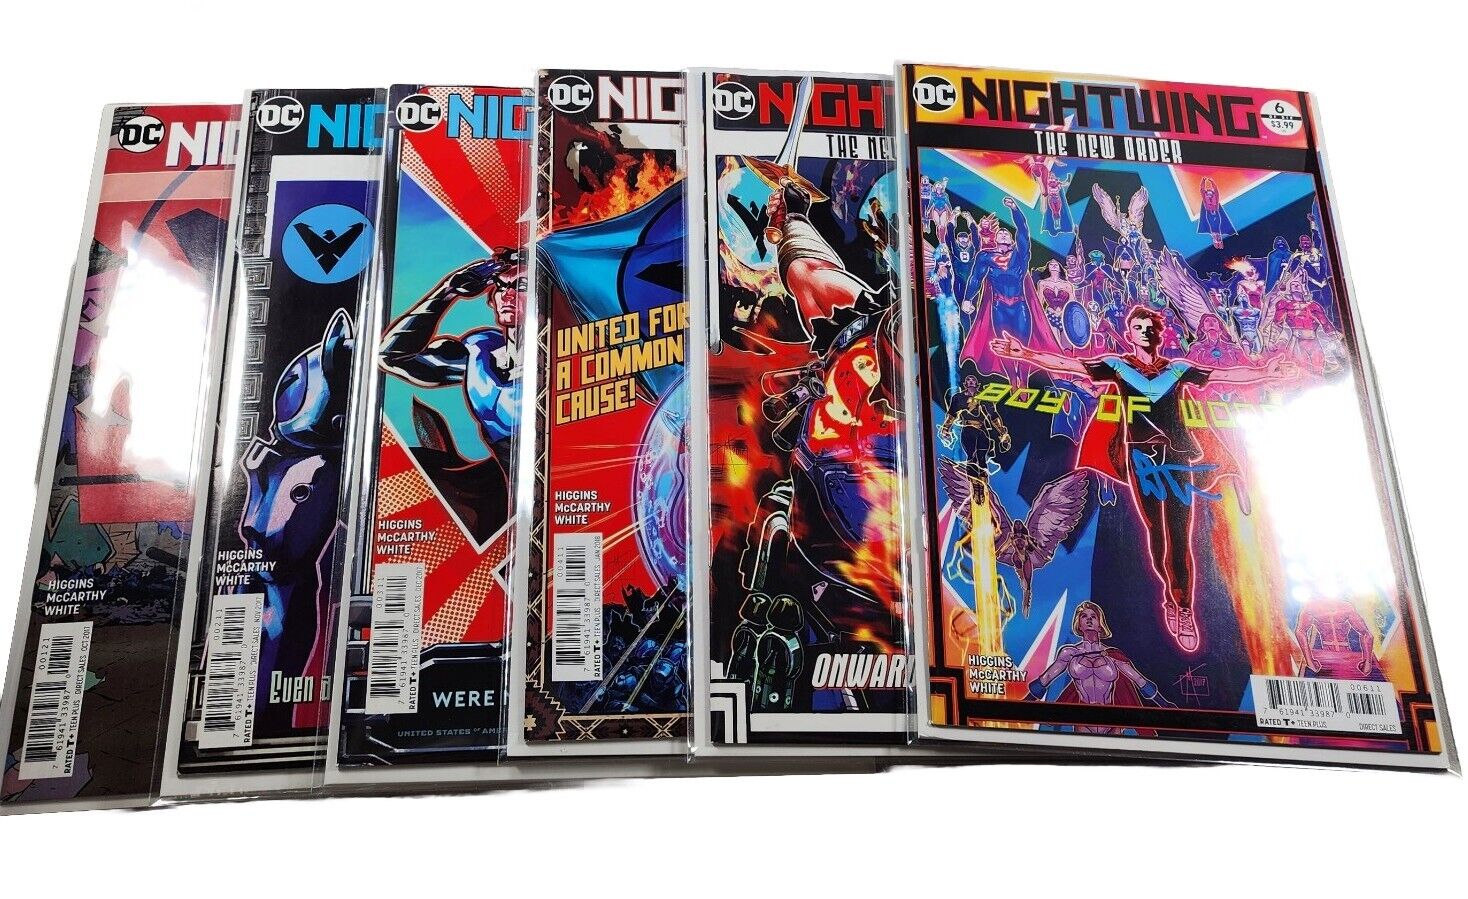 Nightwing The New Order 1-6 SET ALL SIGNED W/COA Dean White 